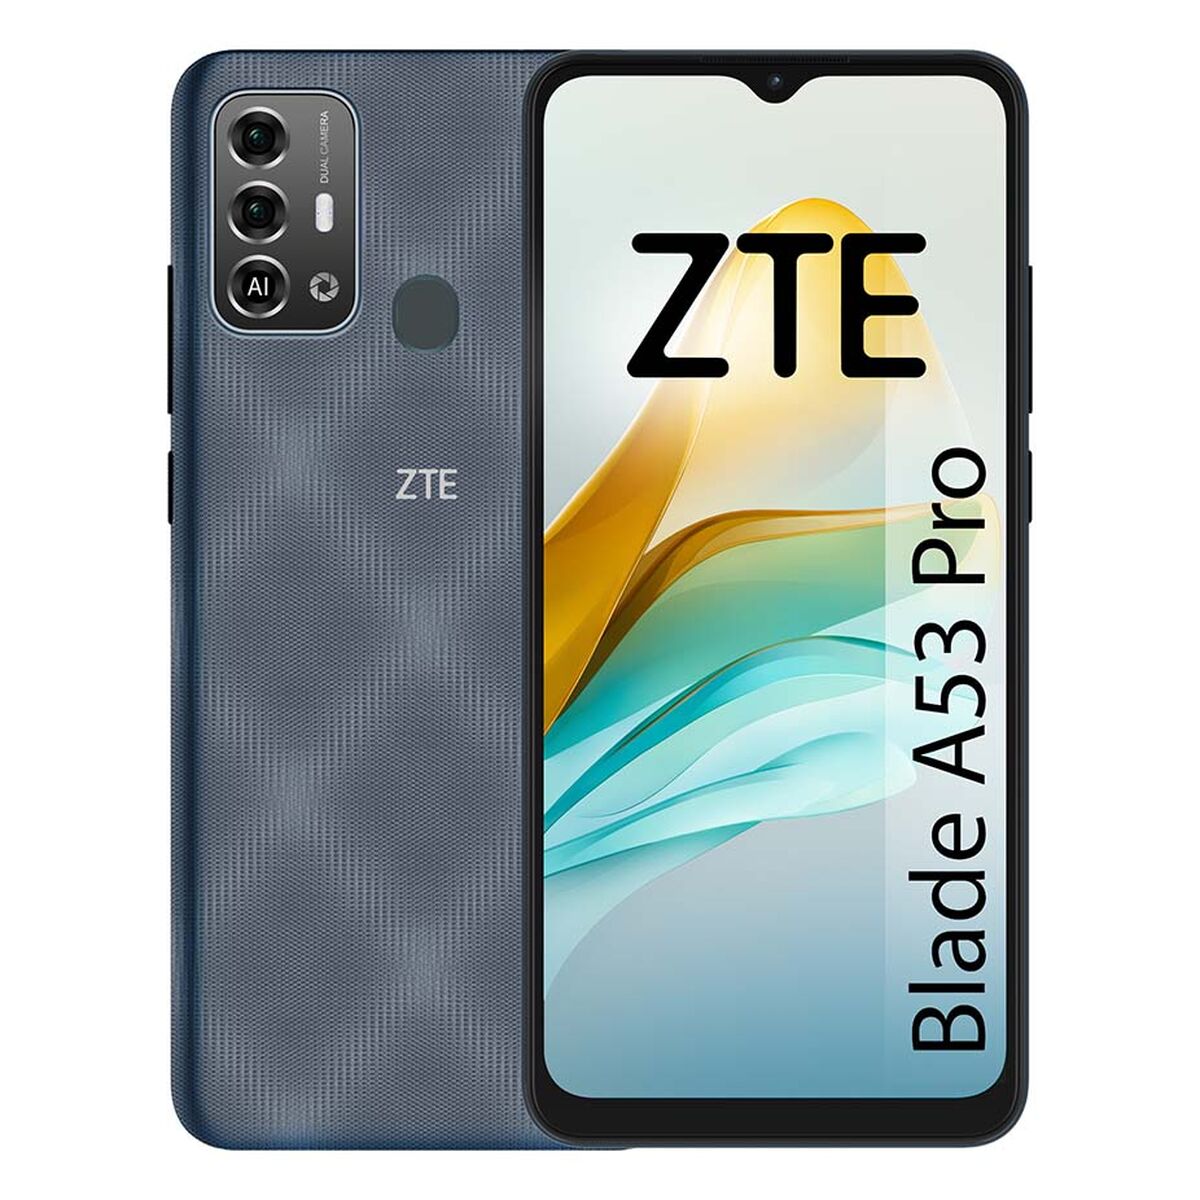 Smartphone ZTE Blade A53 Pro 64 GB 6,52" 8 GB RAM Blue, ZTE, Electronics, Mobile phones, smartphone-zte-blade-a53-pro-64-gb-6-52-8-gb-ram-blue, Brand_ZTE, category-reference-2609, category-reference-2617, category-reference-2618, category-reference-t-19653, category-reference-t-19894, category-reference-t-21319, Condition_NEW, office, Price_100 - 200, telephones & tablets, Teleworking, wifi y bluetooth, RiotNook